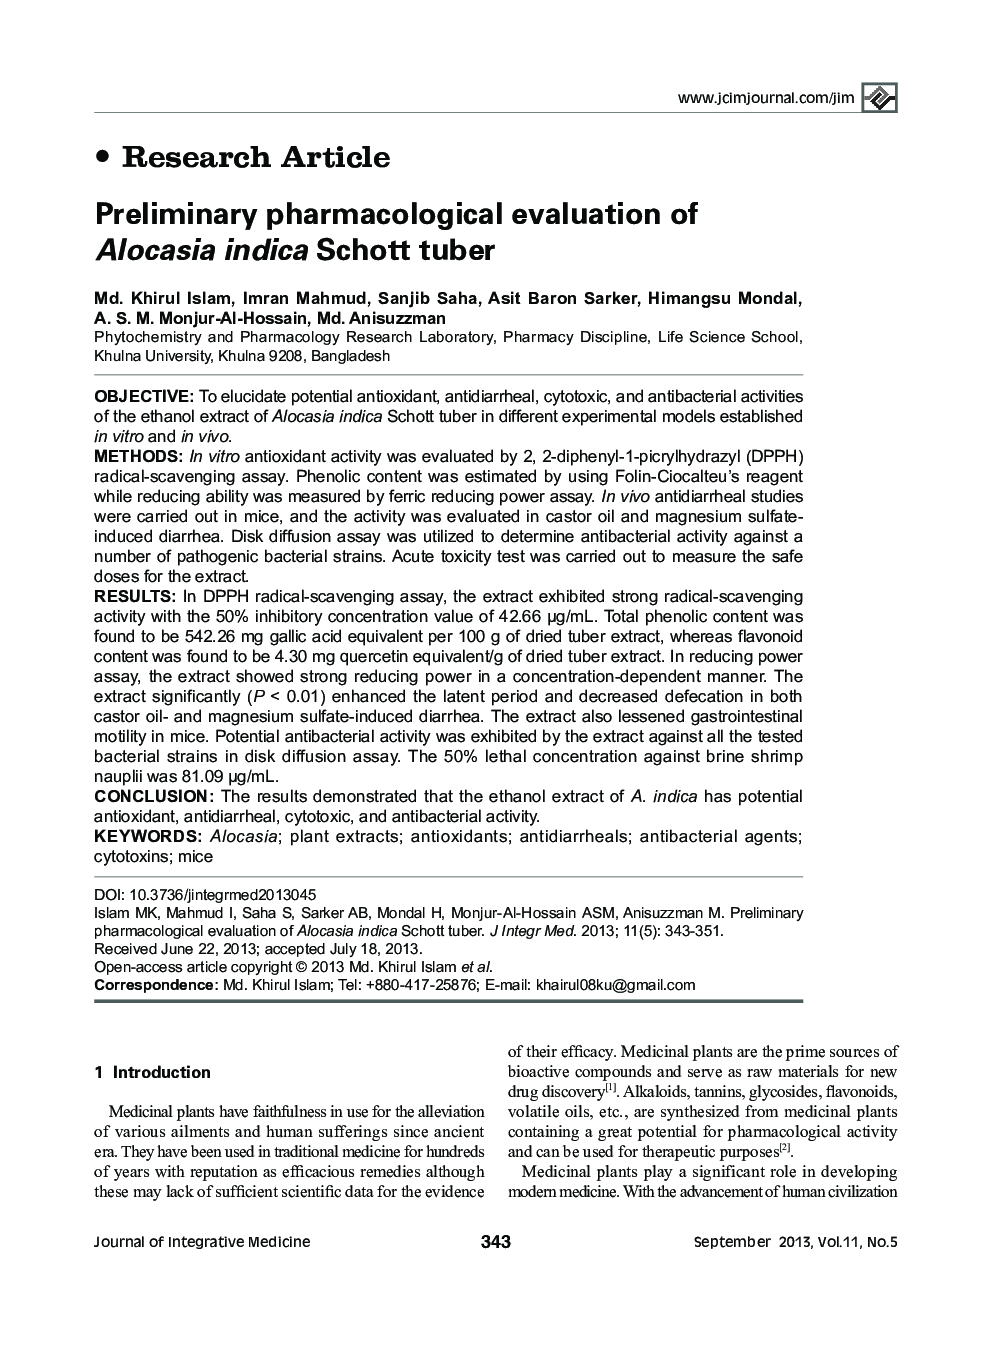 Preliminary pharmacological evaluation of Alocasia indica Schott tuber